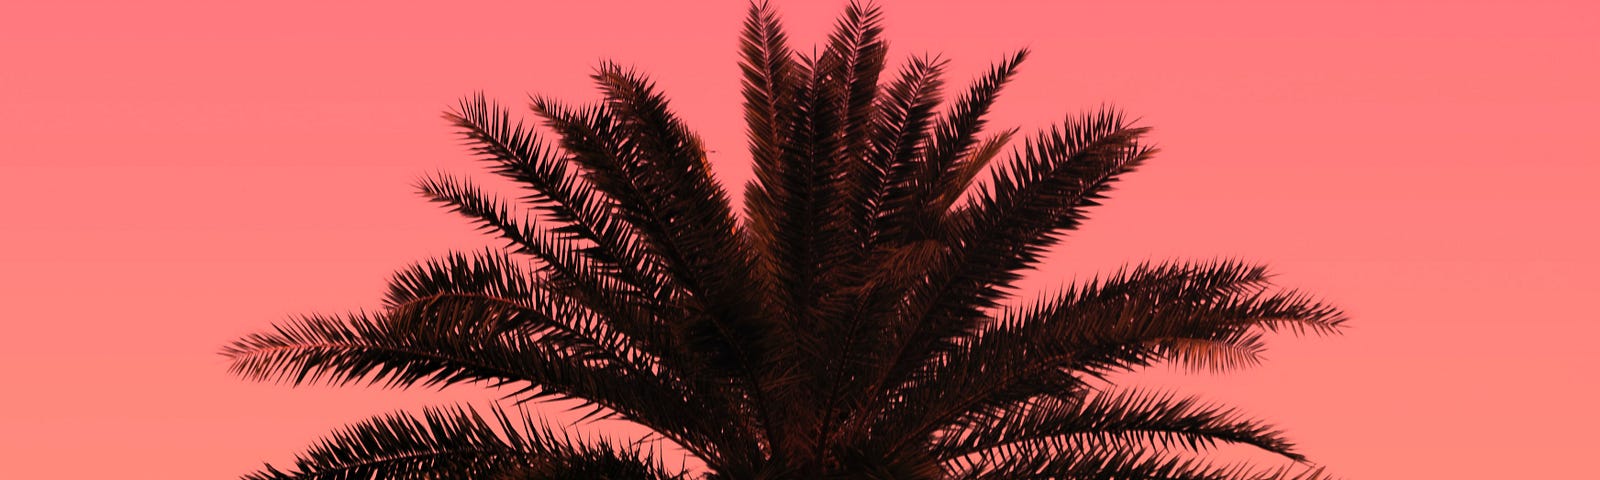 palm tree in sunset. symbolic image used to represent psychological schools